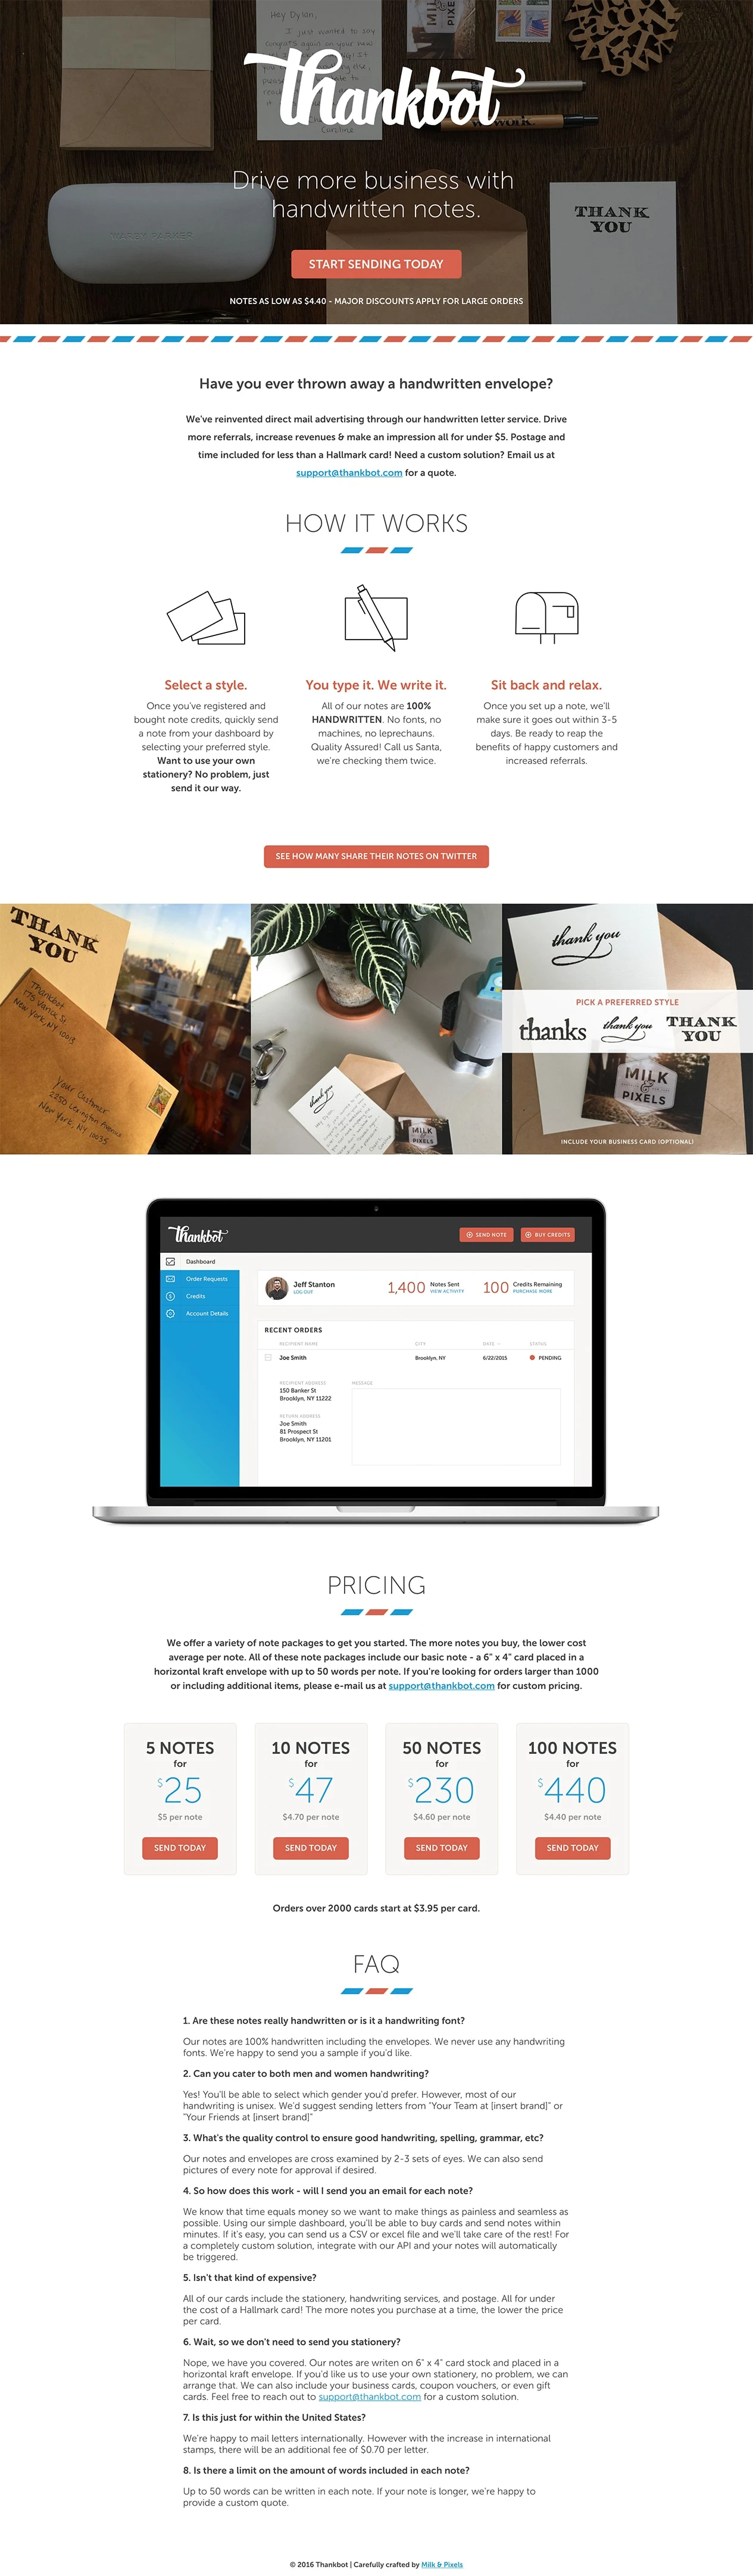 Thankbot Landing Page Example: Drive more business with handwritten notes.